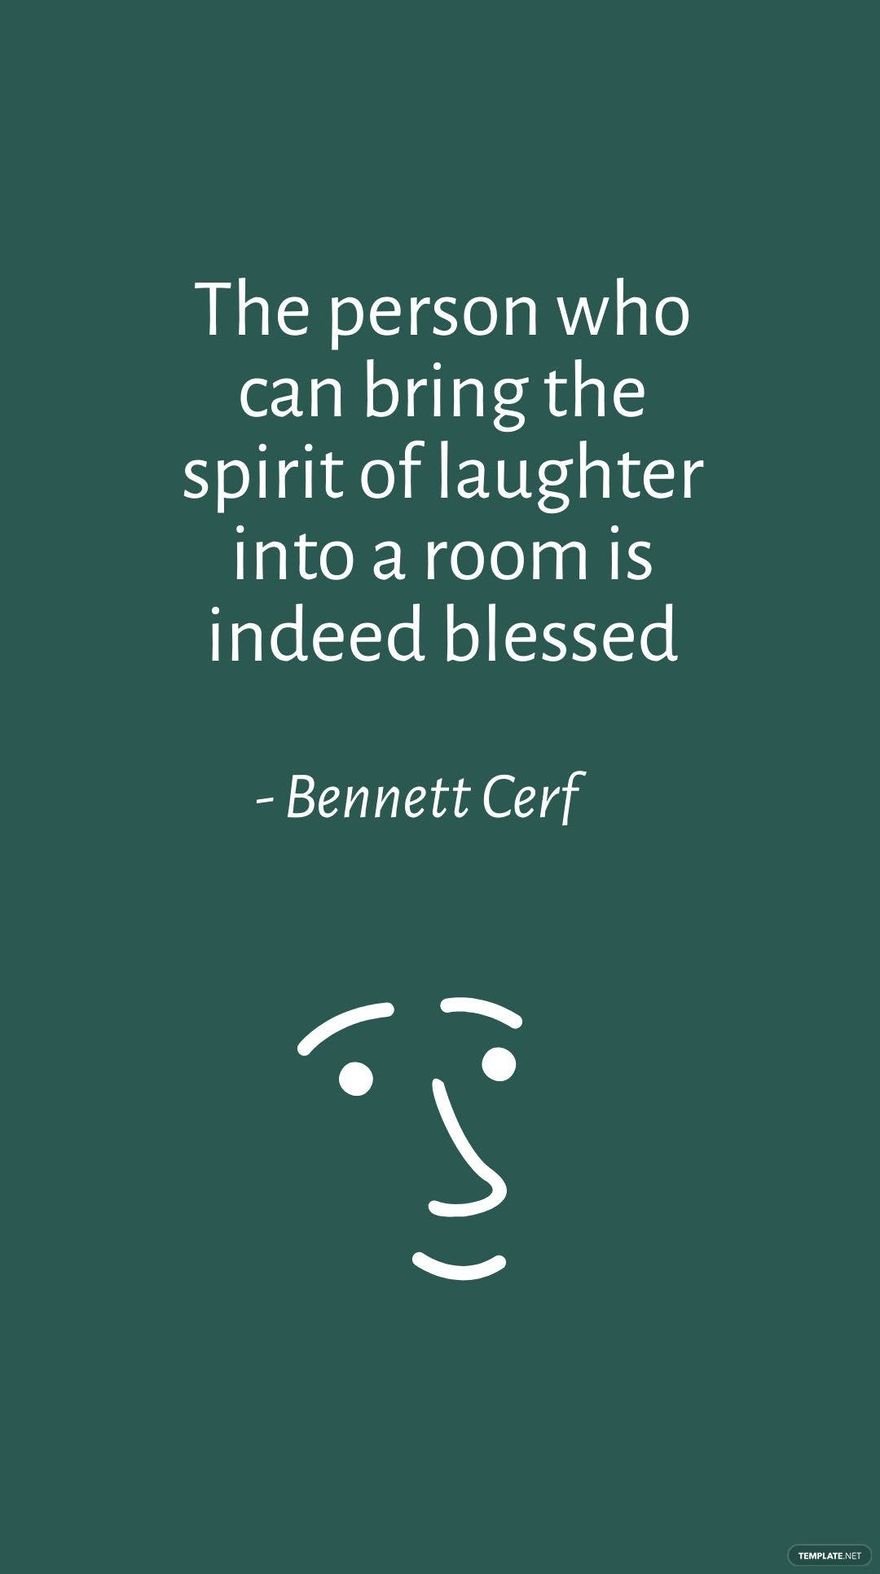 Bennett Cerf - The person who can bring the spirit of laughter into a room is indeed blessed